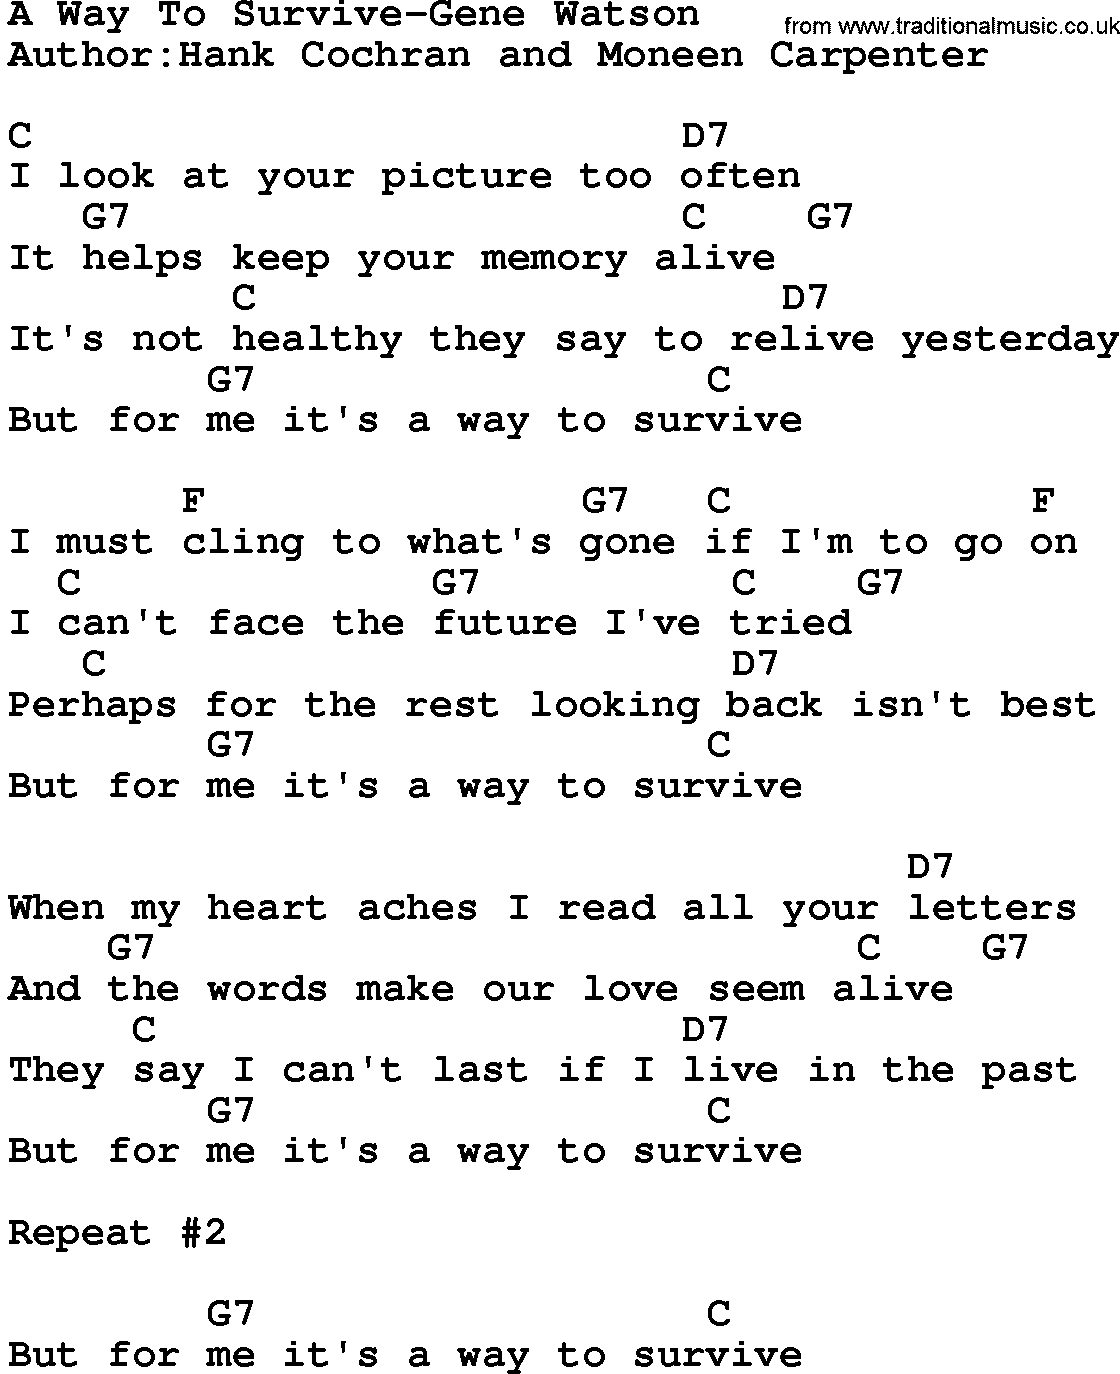 Country music song: A Way To Survive-Gene Watson lyrics and chords